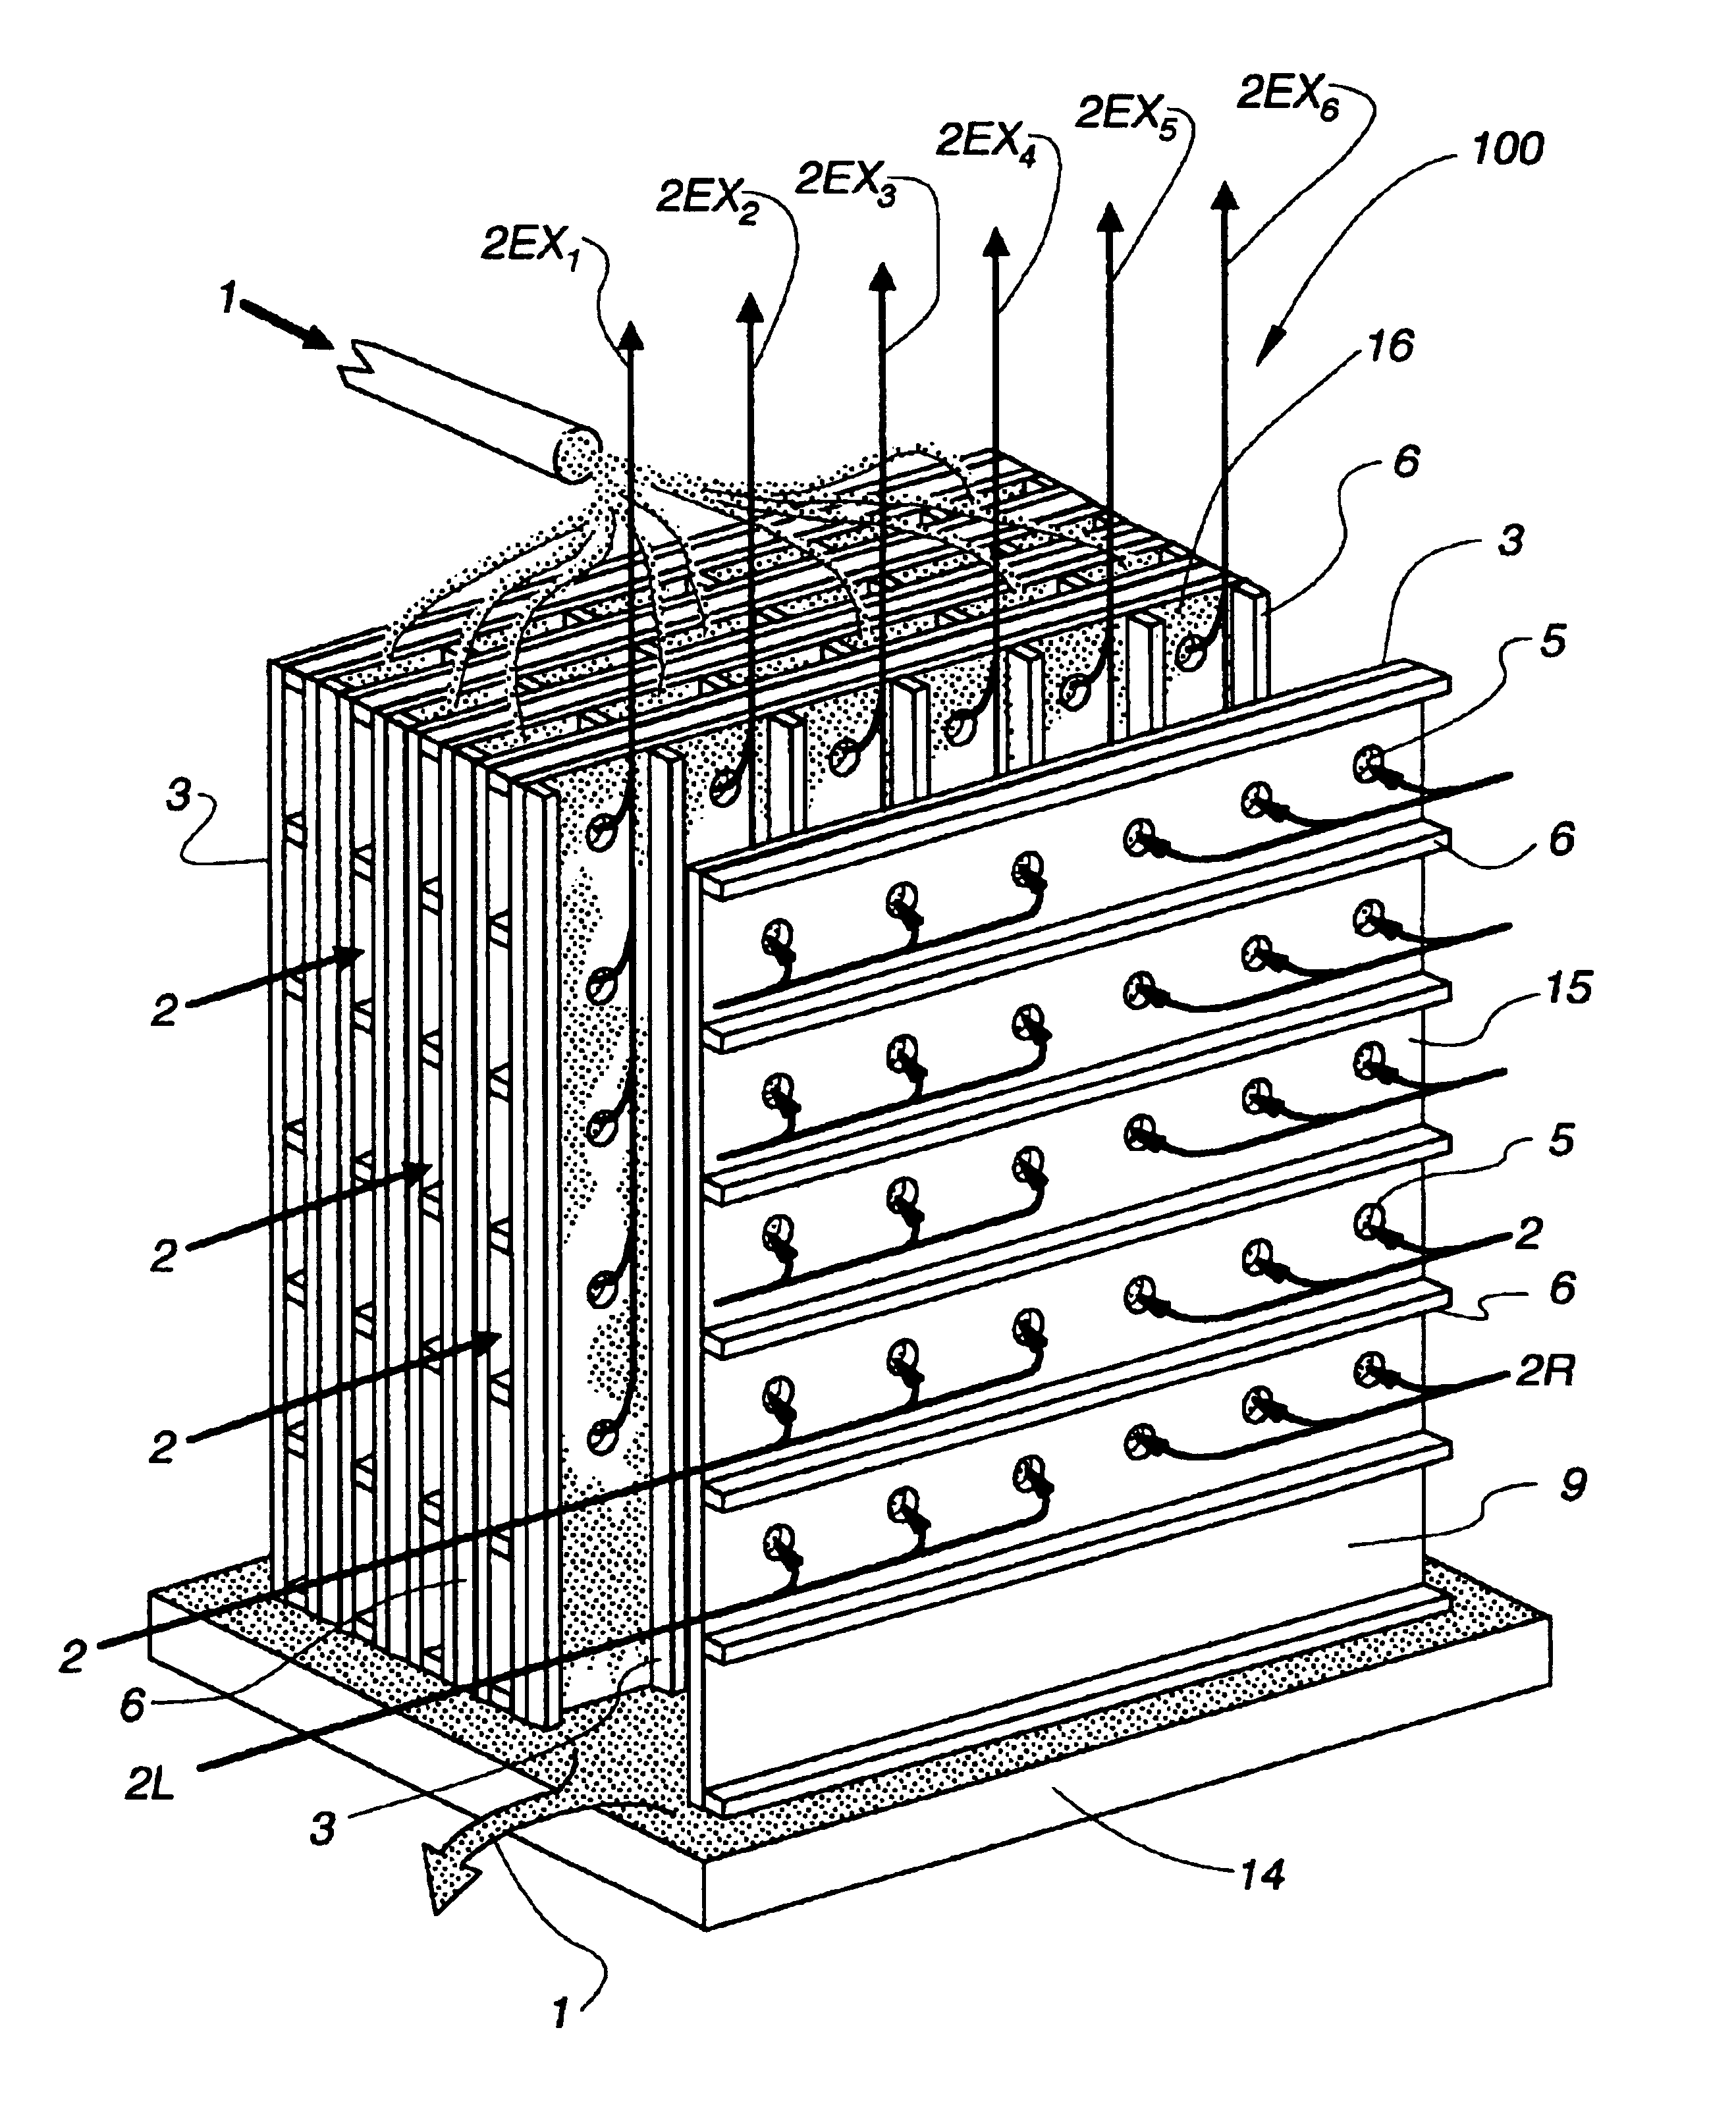 Method of evaporative cooling of a fluid and apparatus therefor